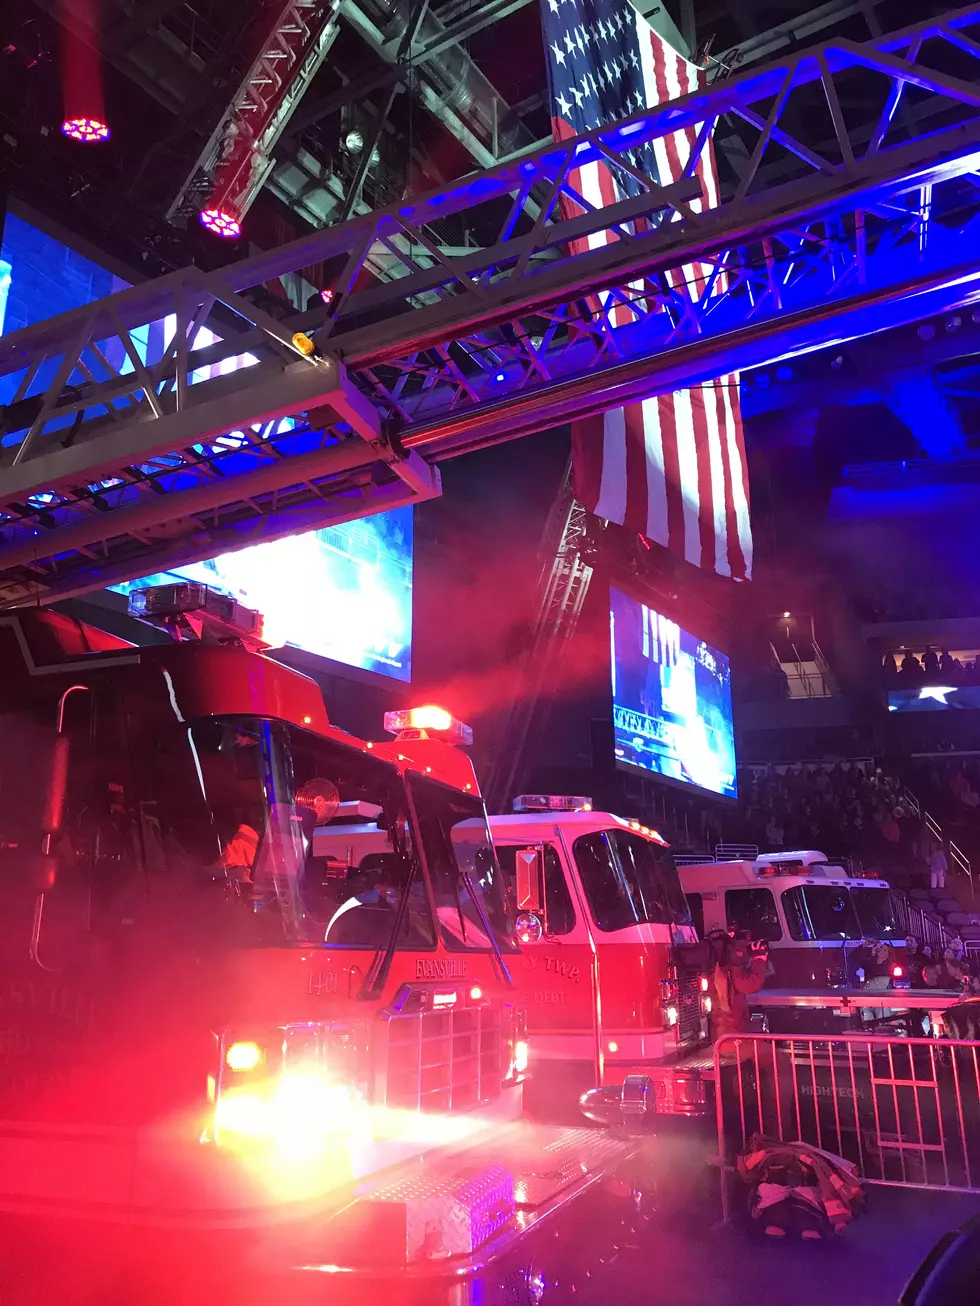 [Watch] Guns and Hoses XI Ends with a Proposal